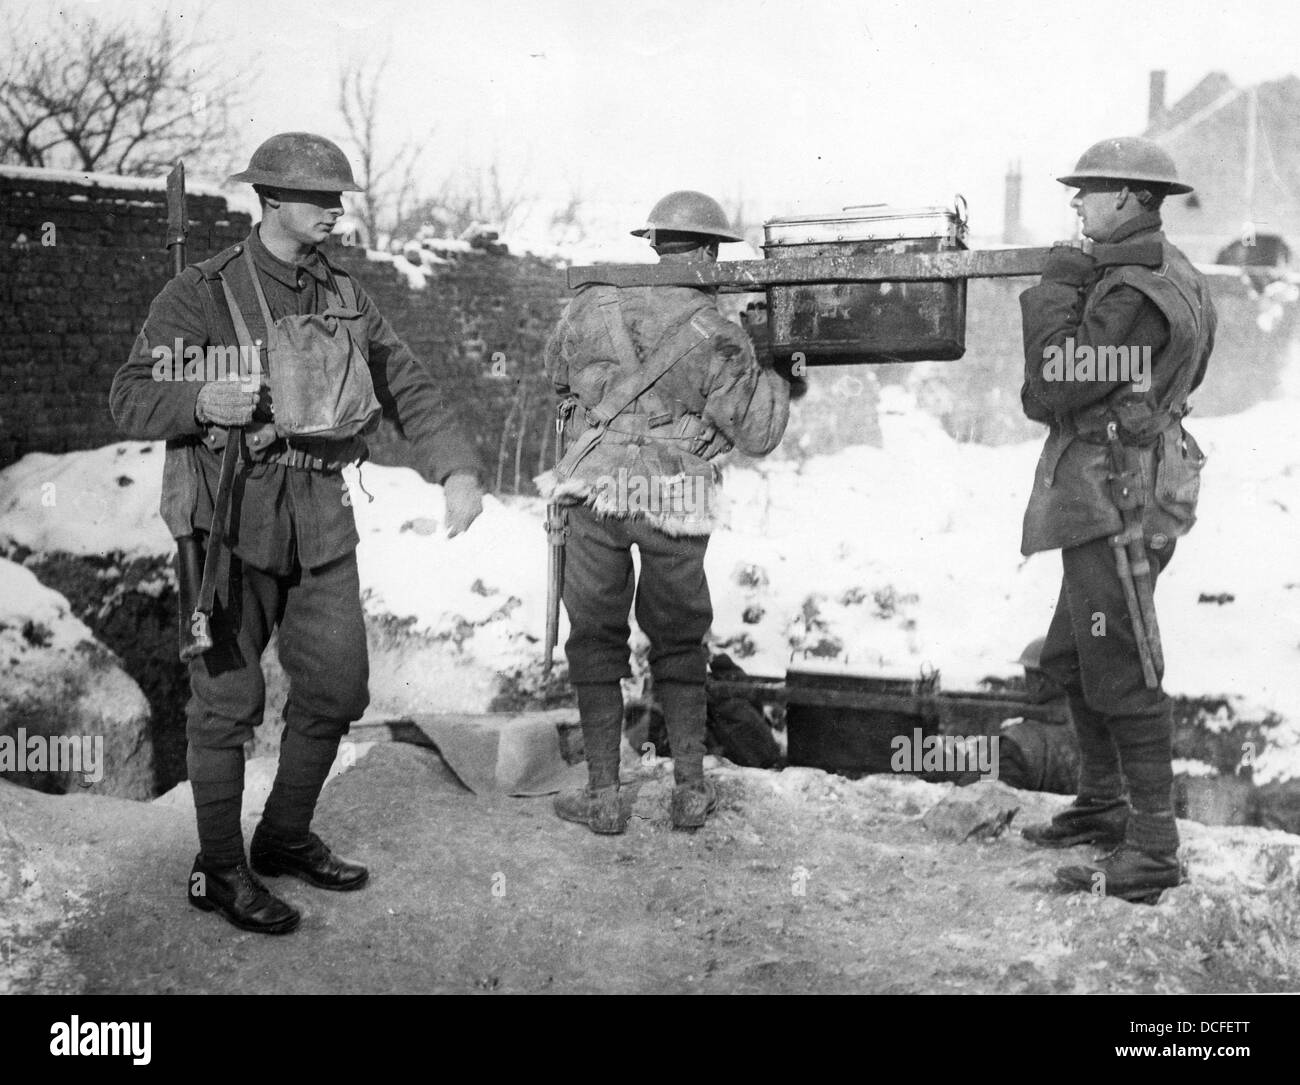 Great War. WW1 Soldiers prepare to carry rations up to the front line trenches on a snowy winters day. Stock Photo